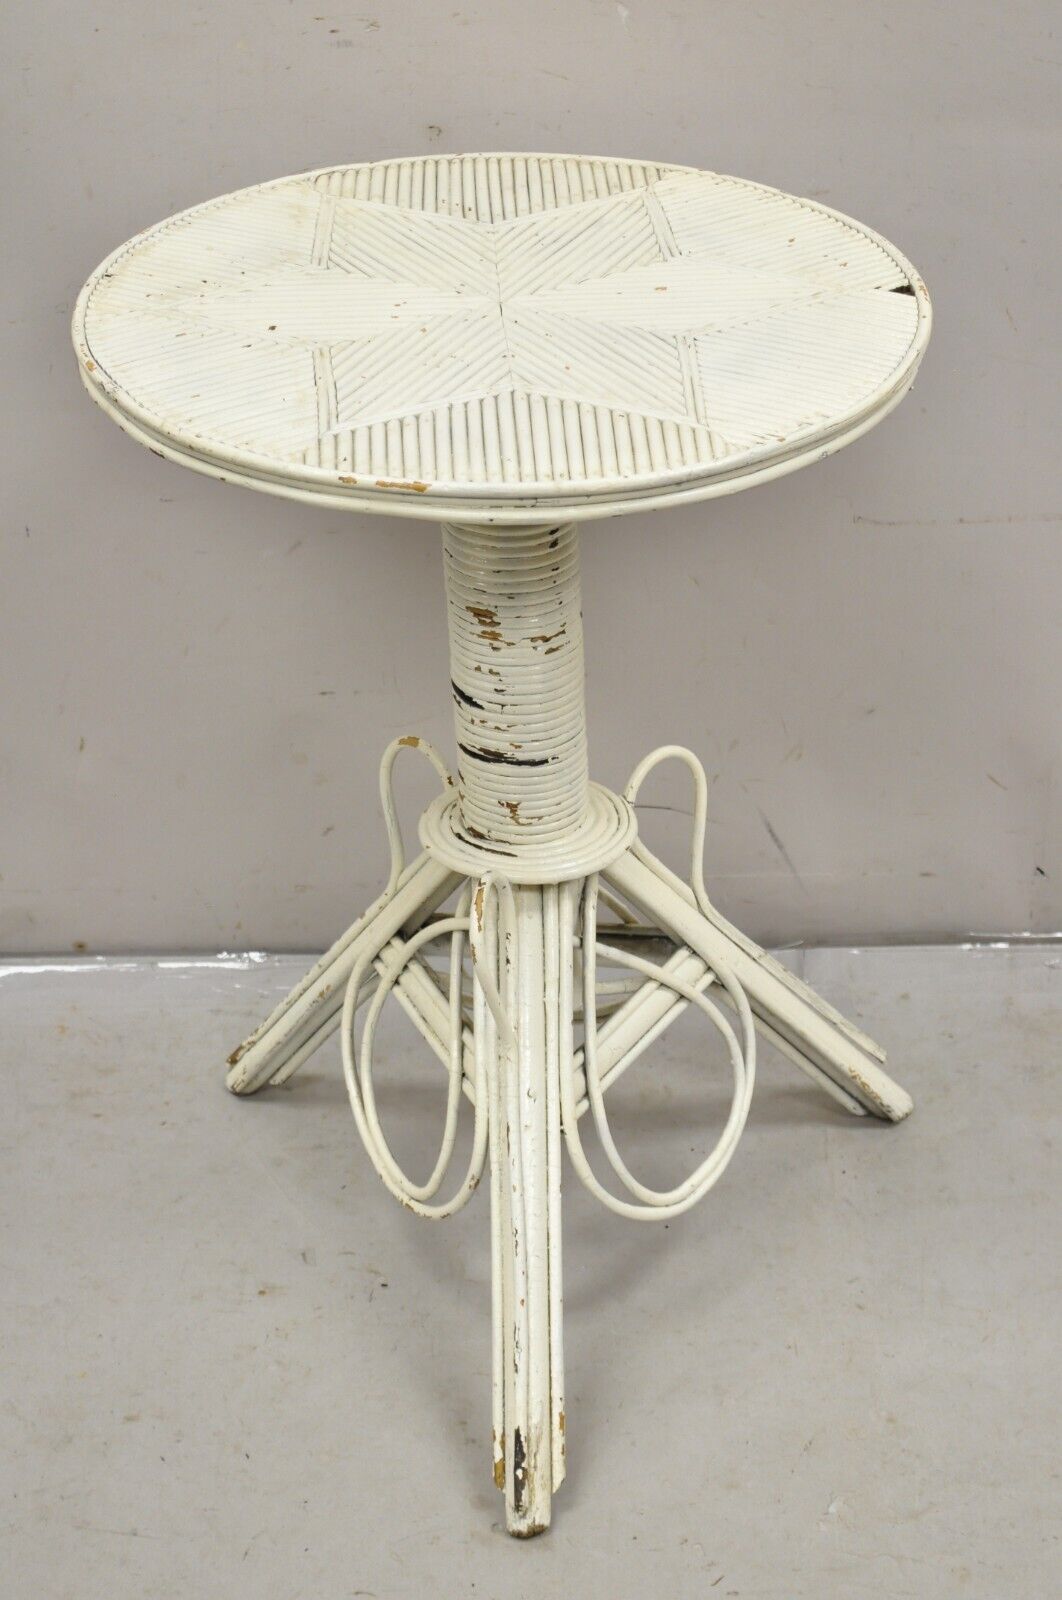 Antique Victorian Bentwood Wicker Rattan White Painted Accent Side Table